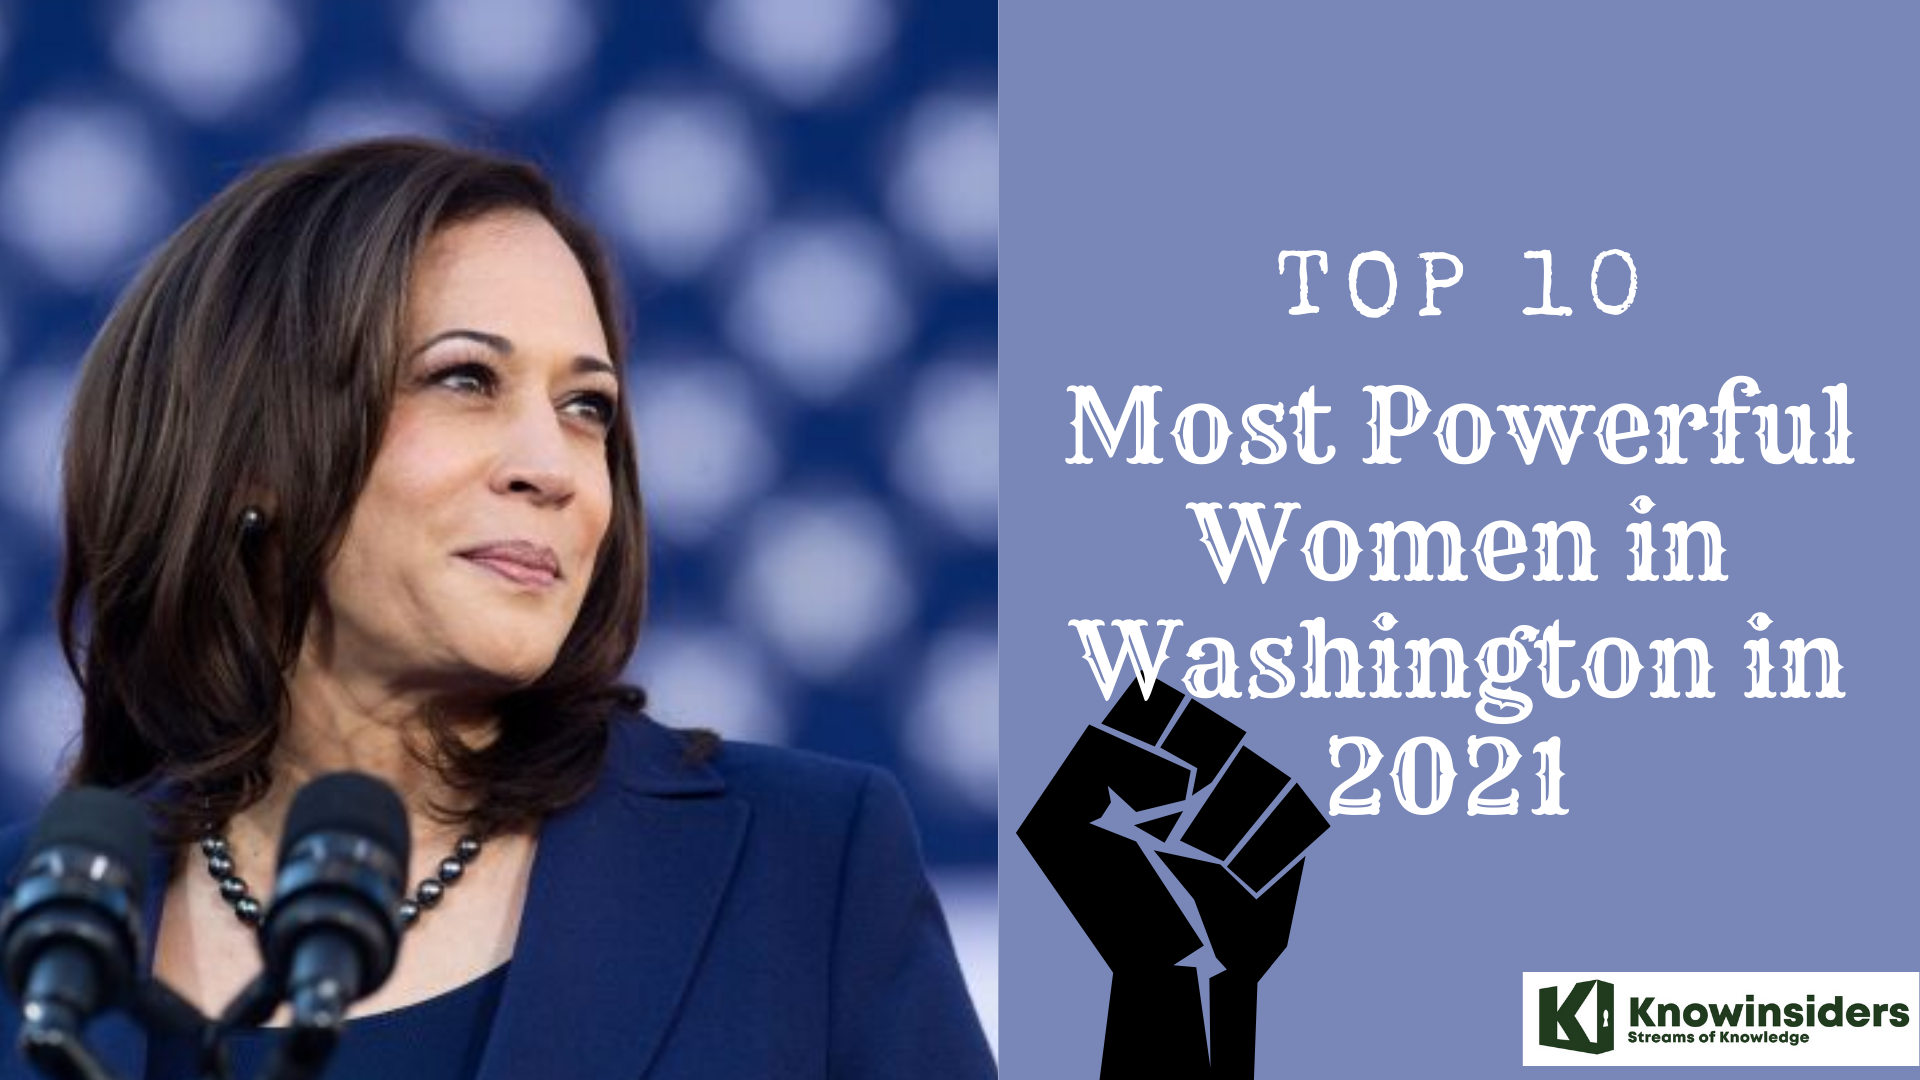 Top 10 Most Powerful Women in Washington for Politics, Business, Legal, Education, Medicine and More